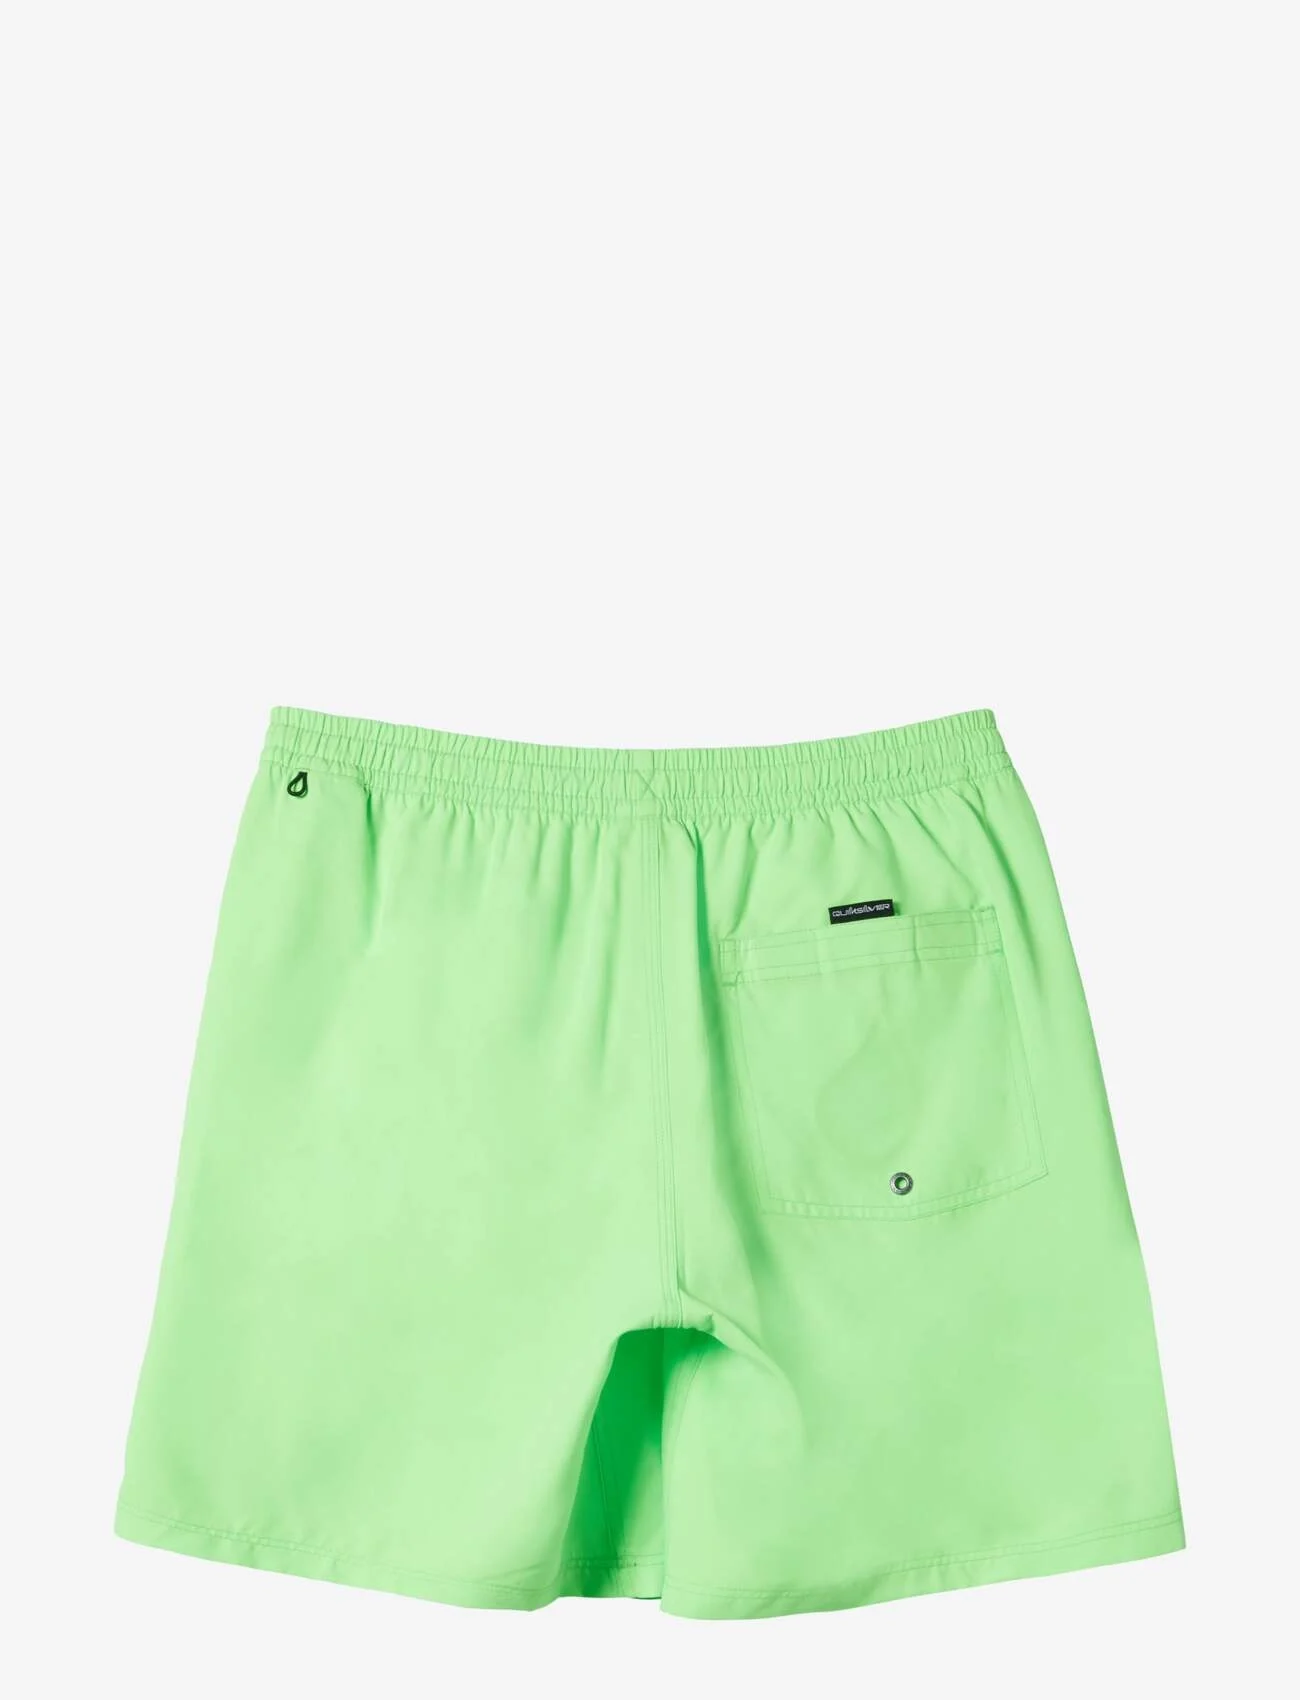 Quiksilver - EVERYDAY SOLID VOLLEY YTH 14 - badebukser - green gecko - 1